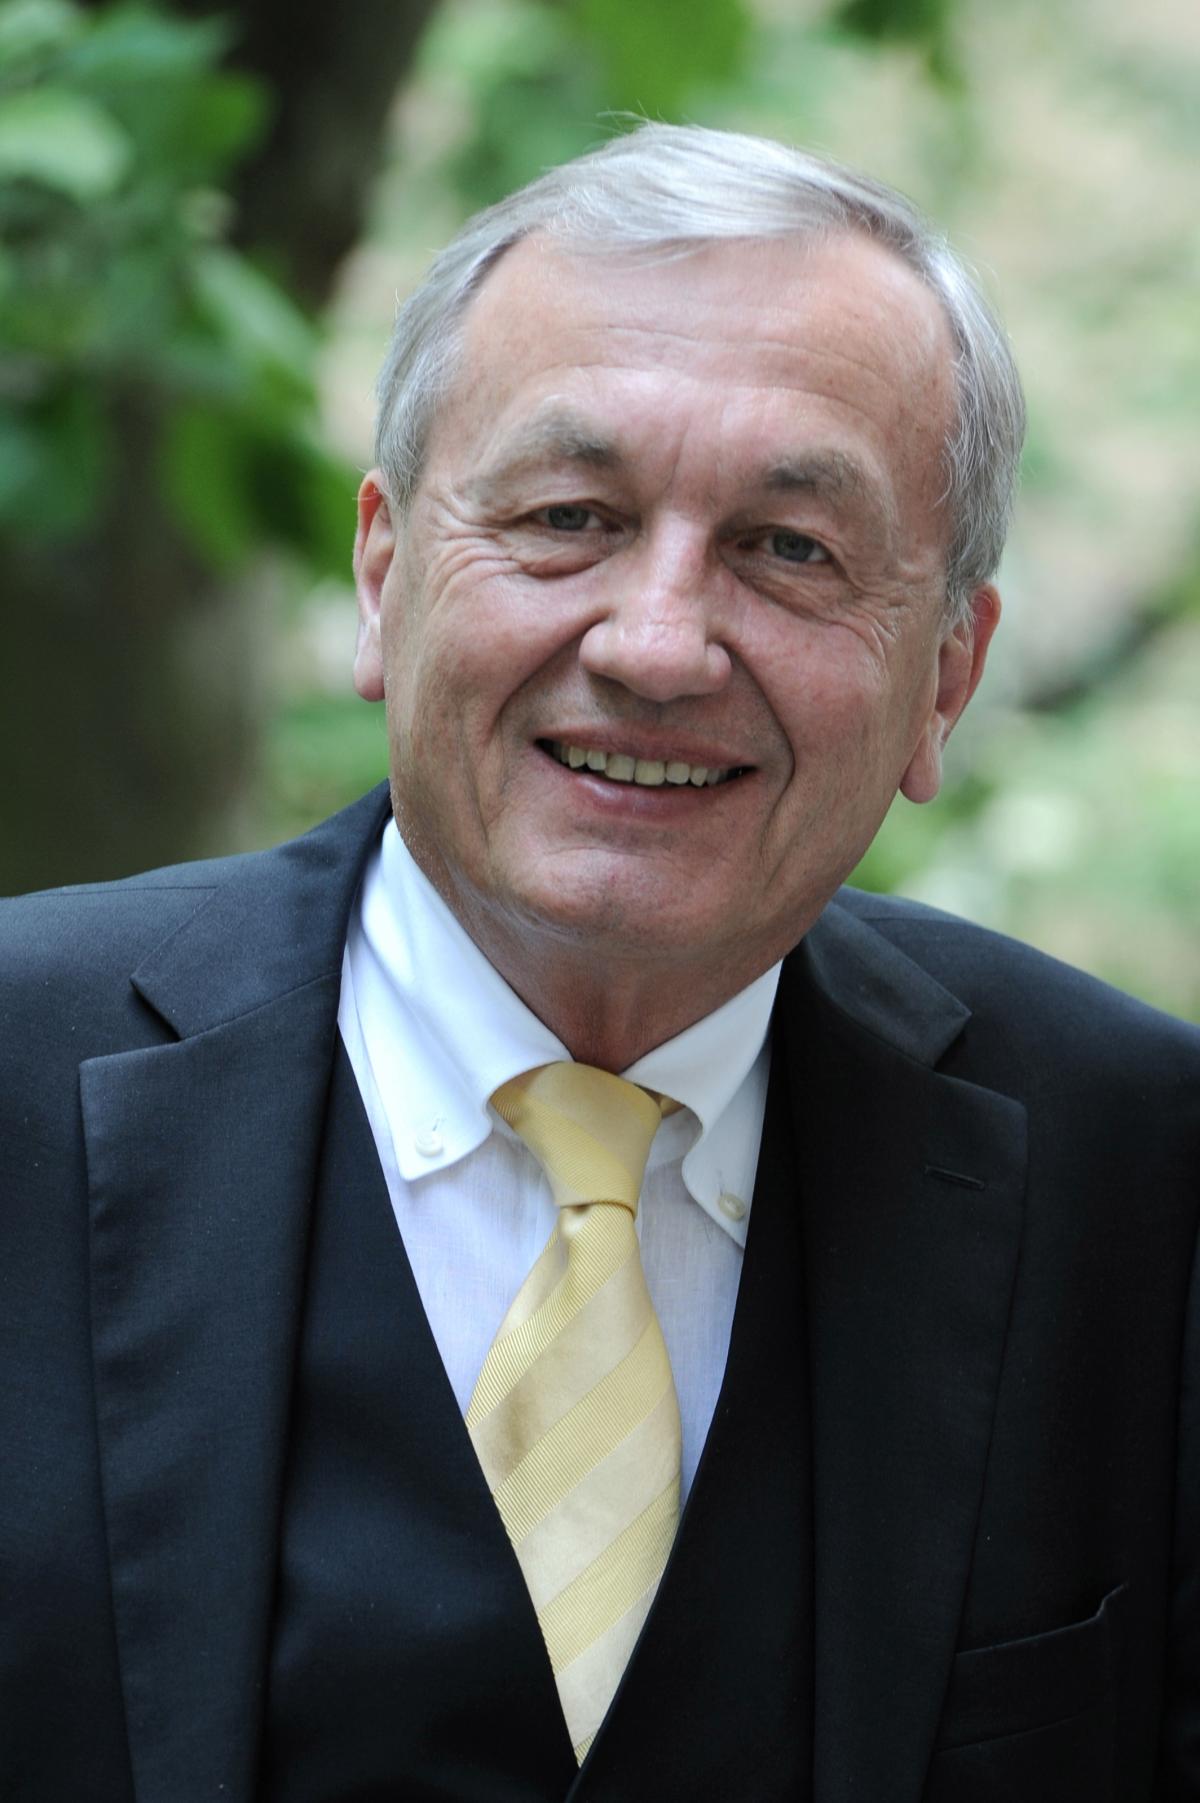 Uwe Franke, President of the German Member Committee of the World Energy Council